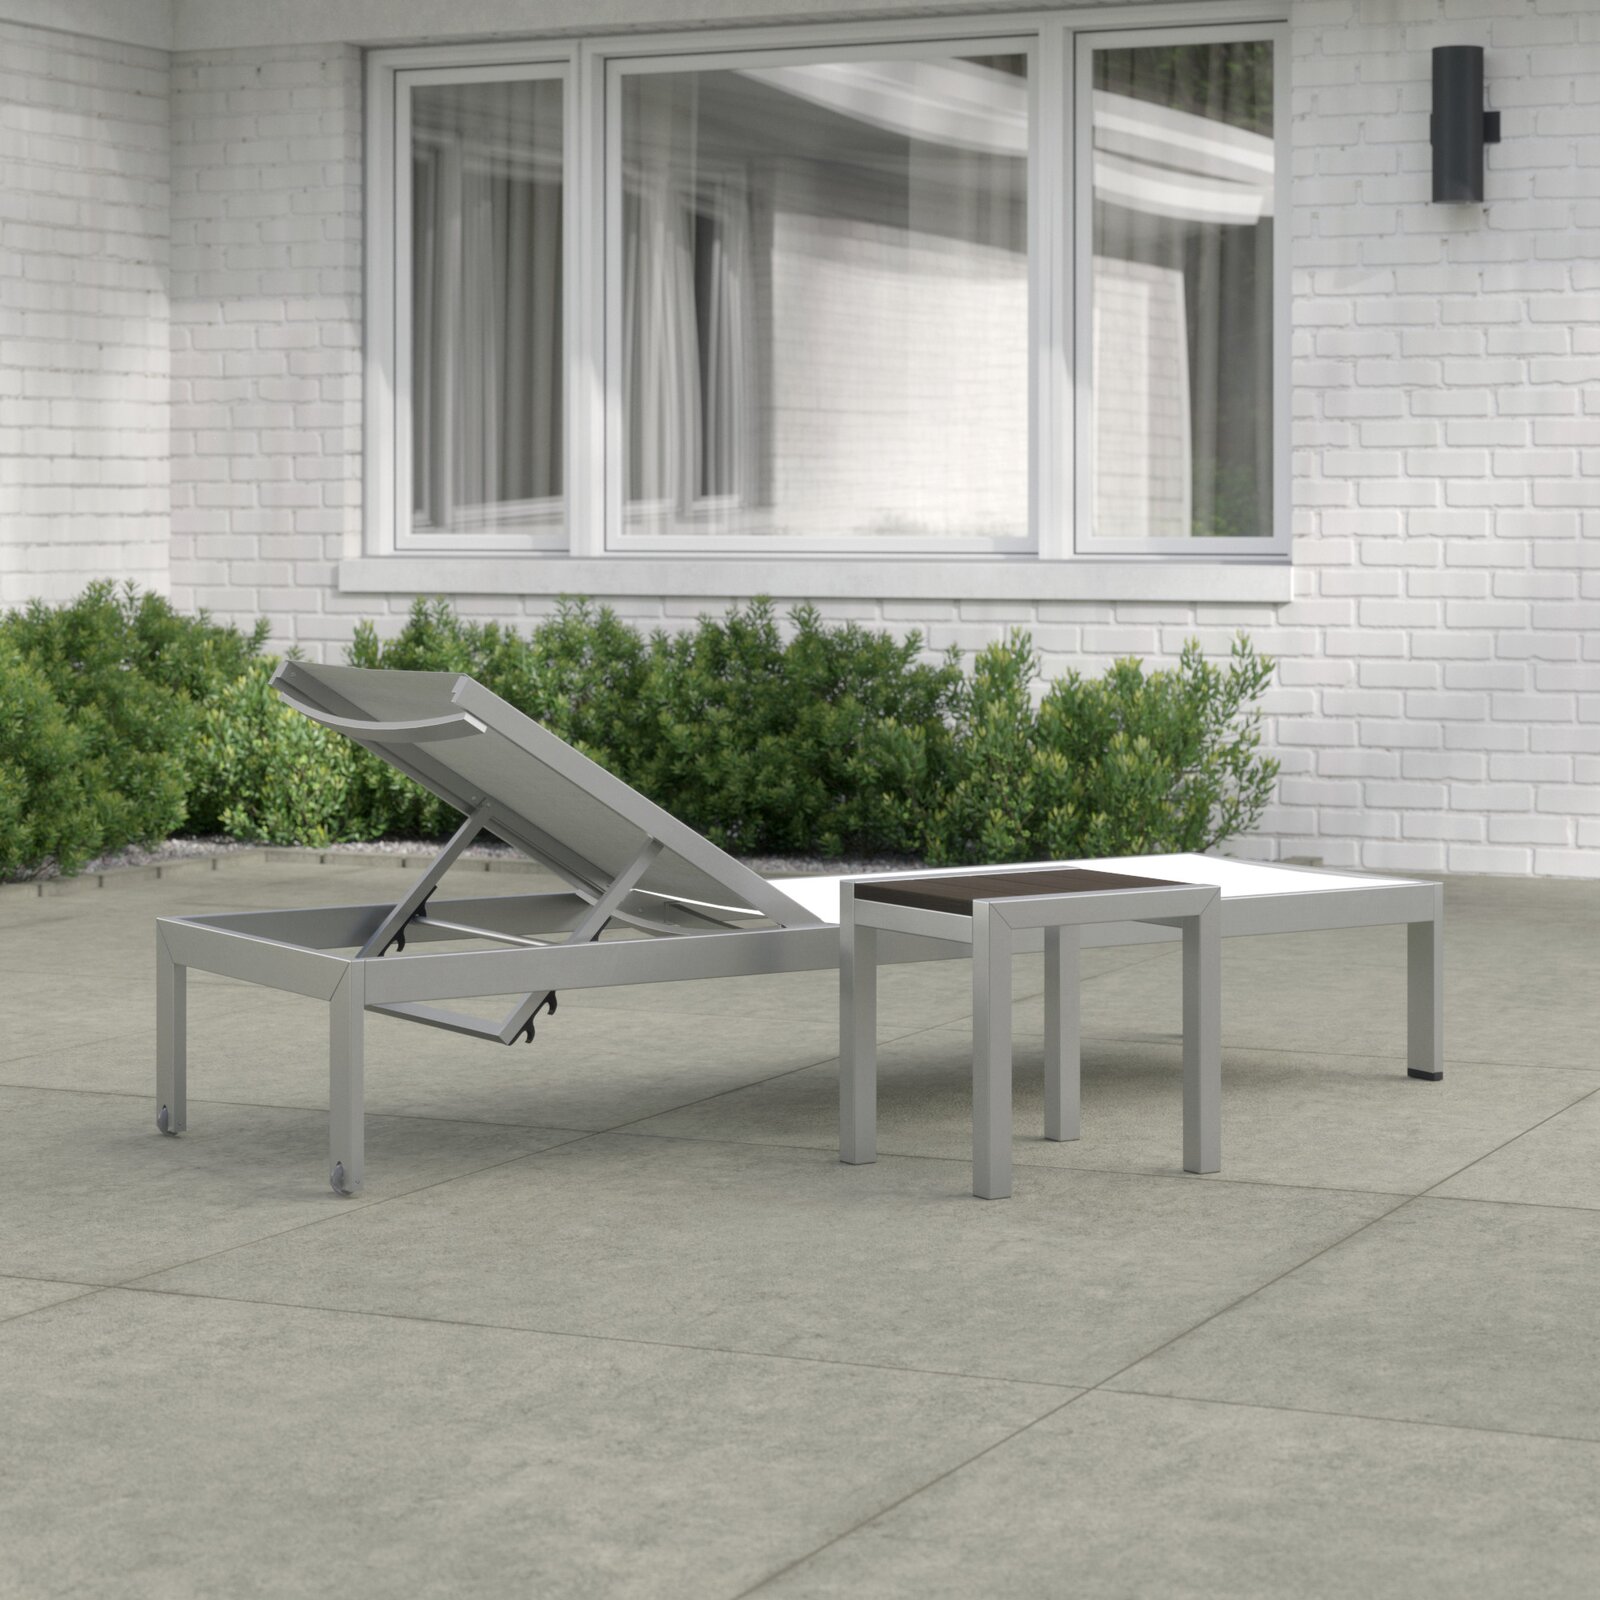 Coline Outdoor Patio Reclining Chaise Lounge with Table, Recliner/height adjustable, Reclining - image 2 of 7